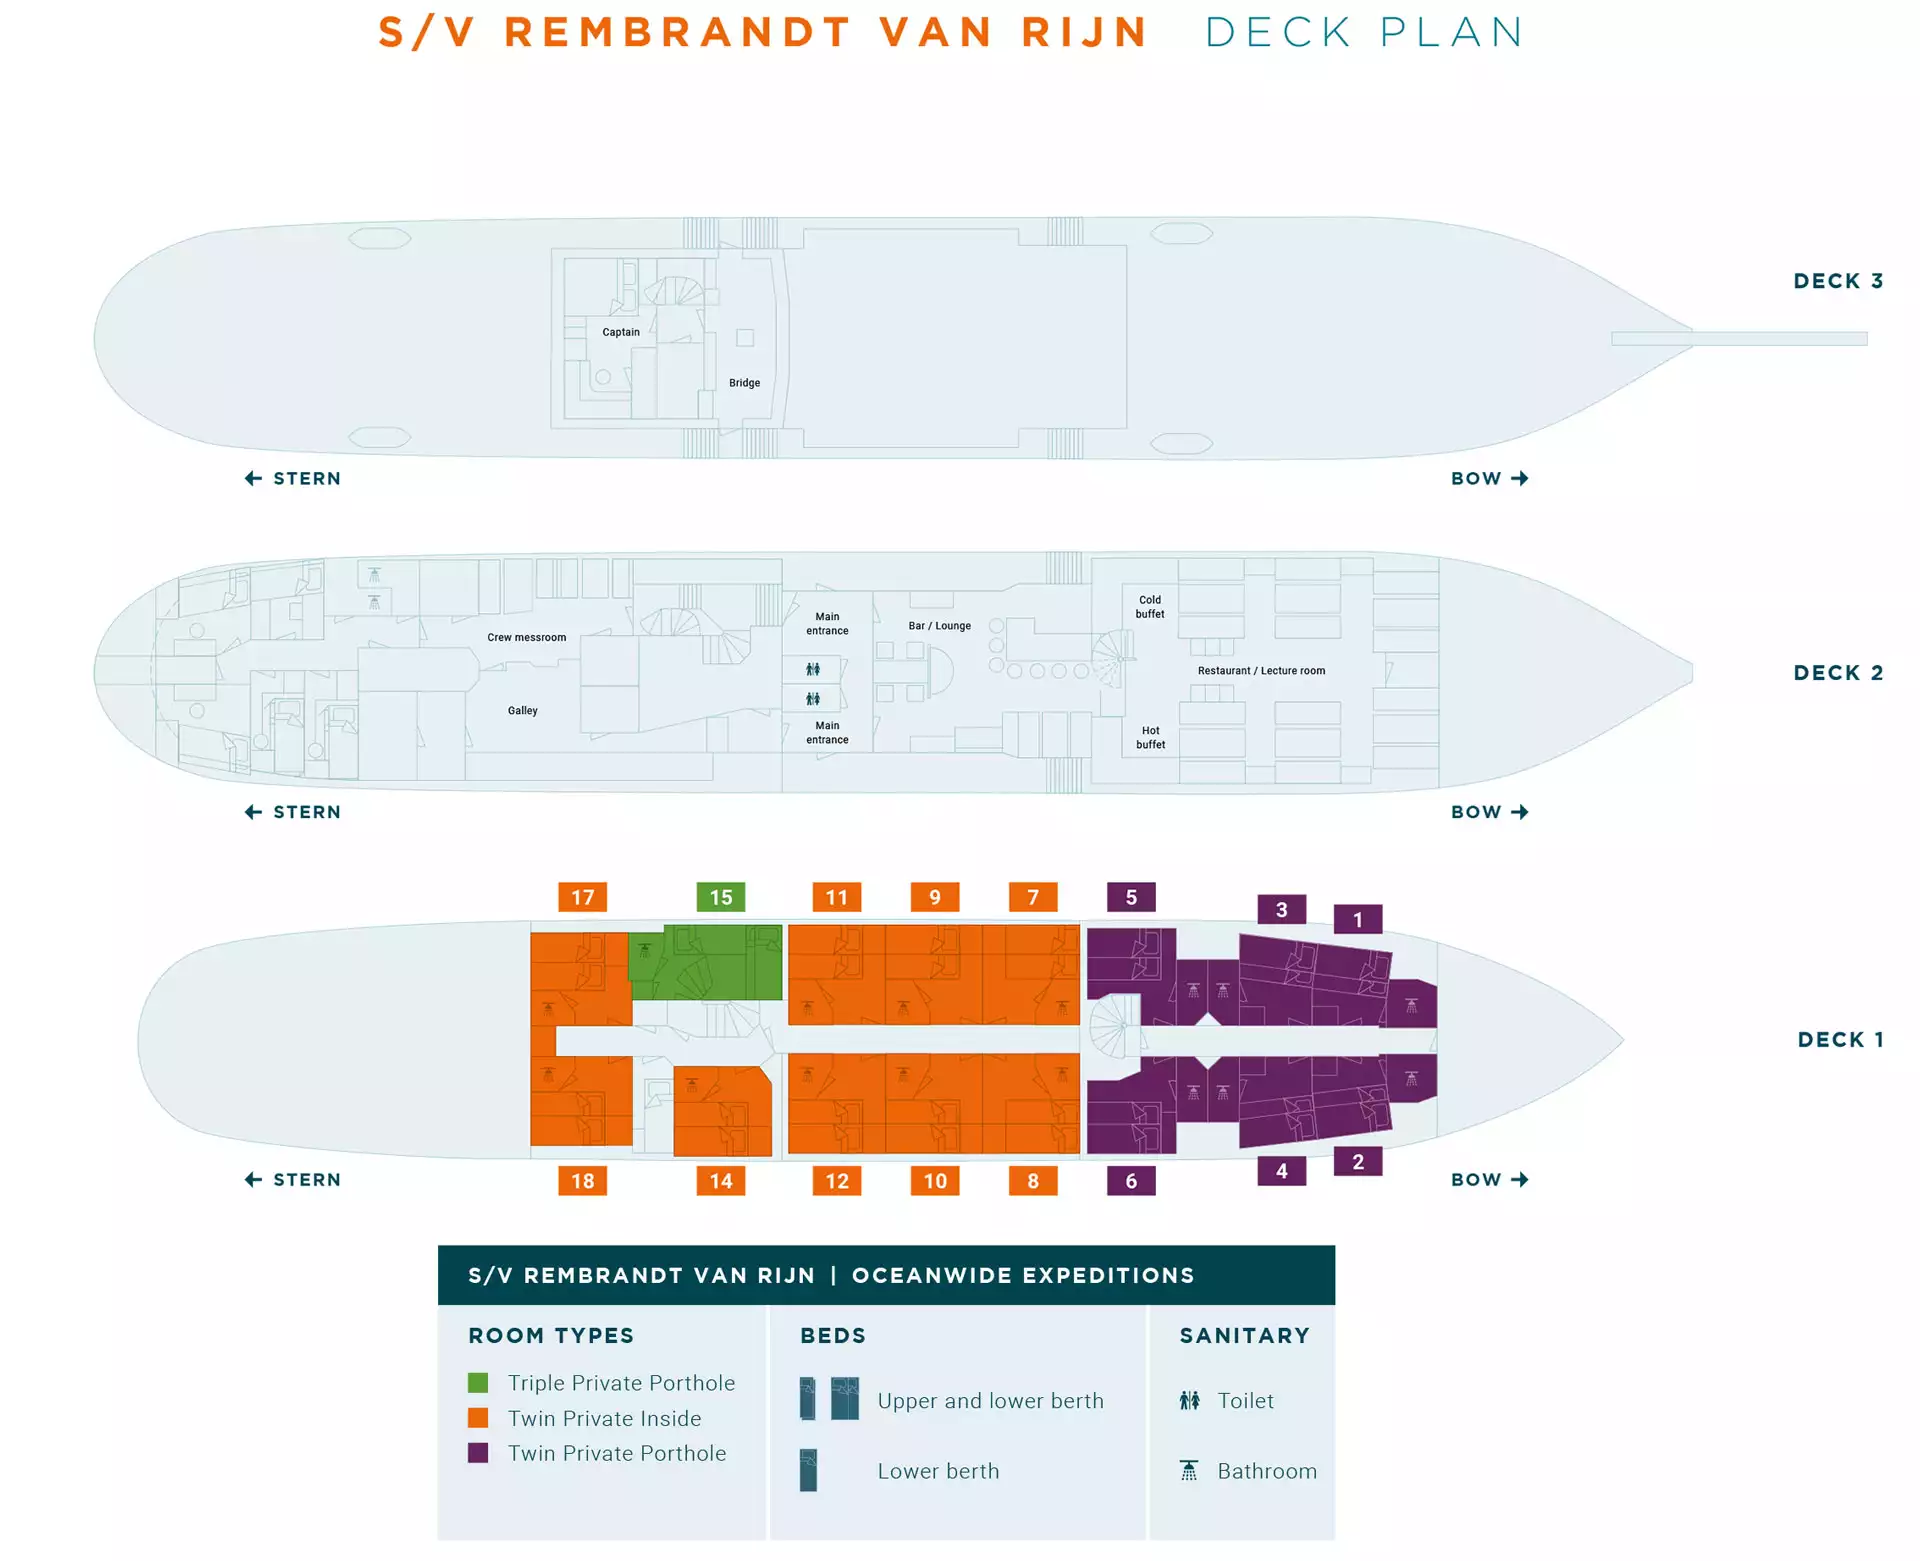 Rembrandt van Rijn small ship deck plan with 3 levels and a key